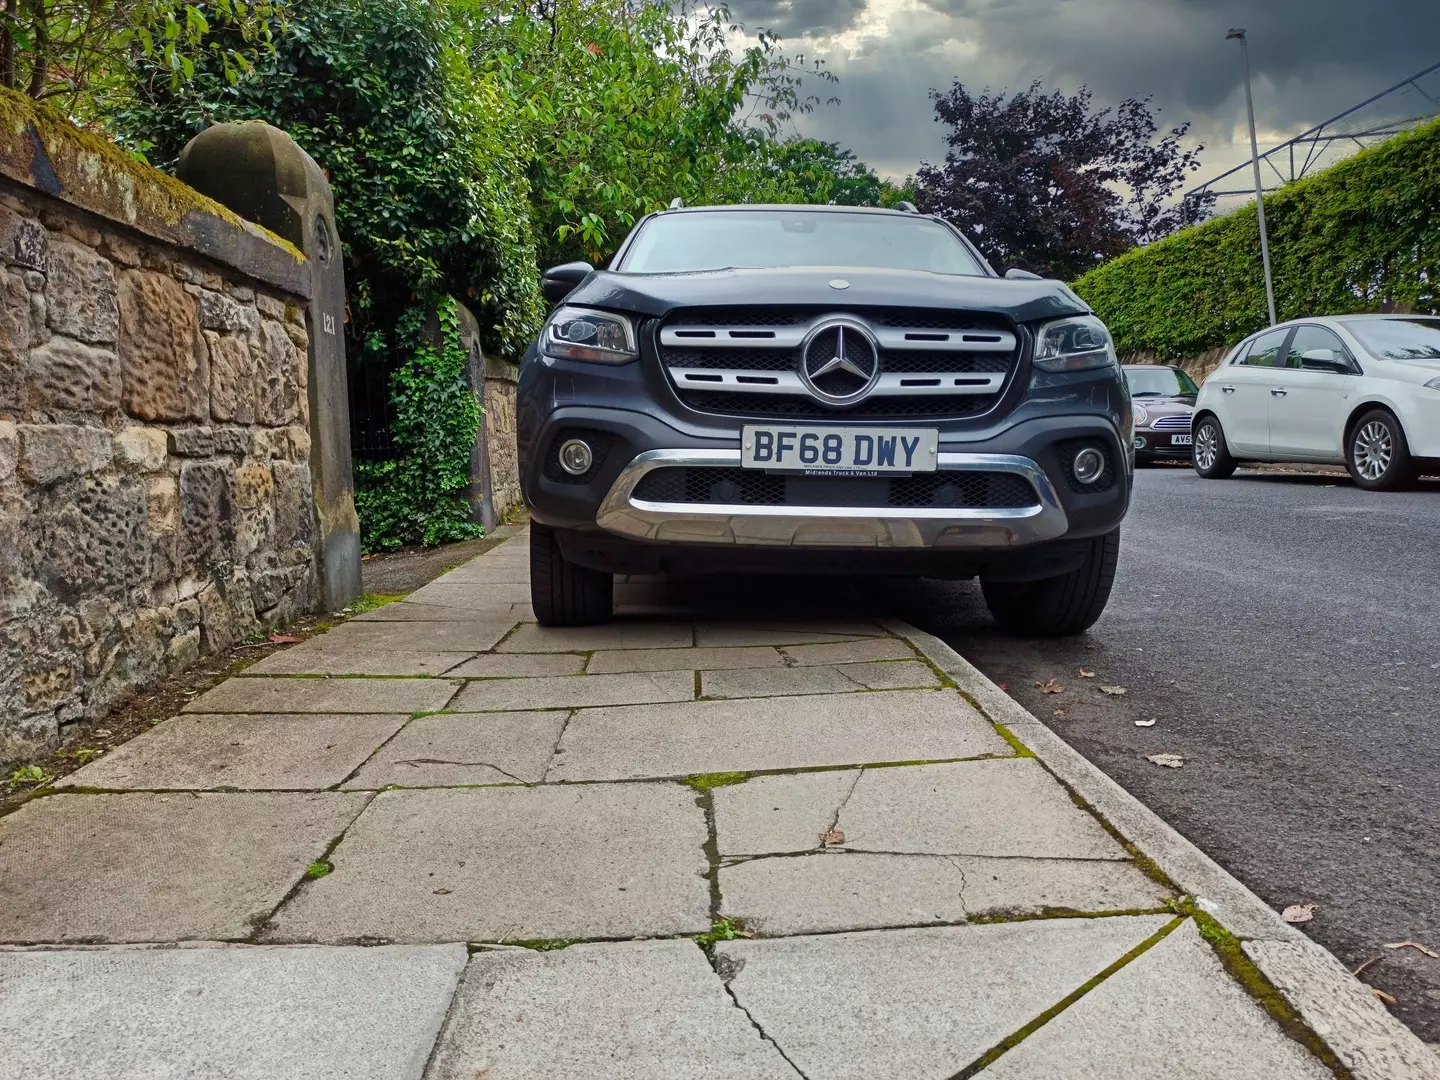 Parking on the pavement may be banned in England next year (